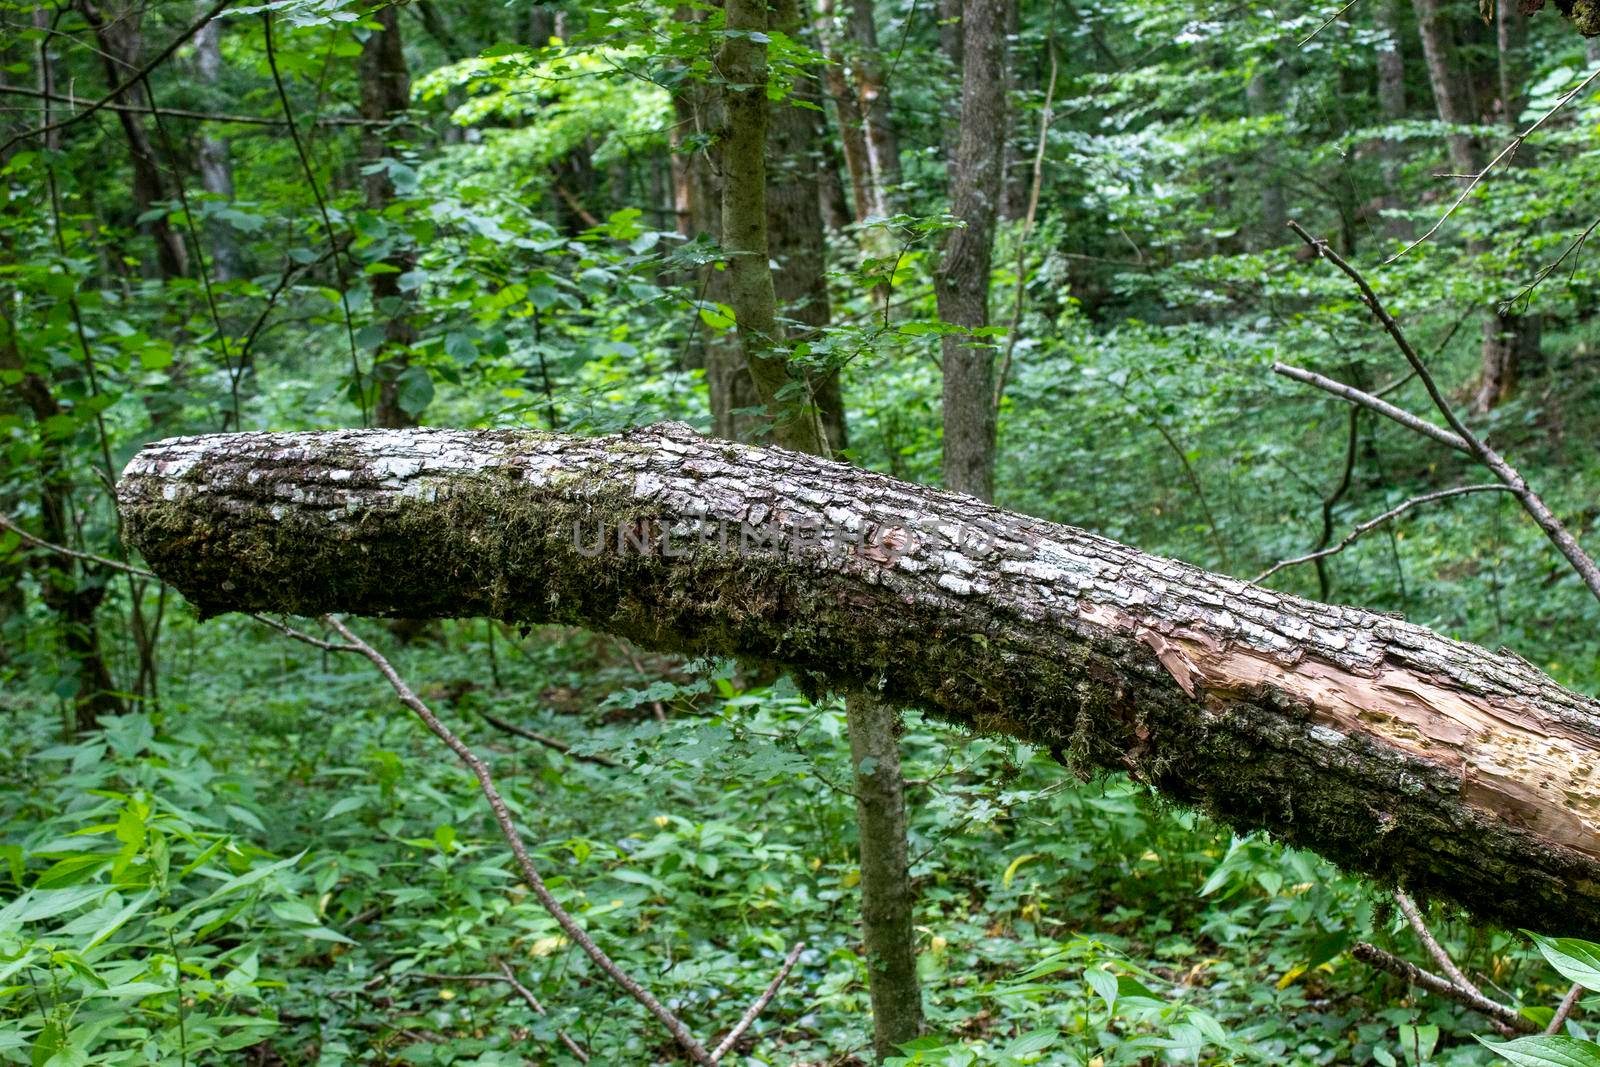 A fallen tree, left in the air